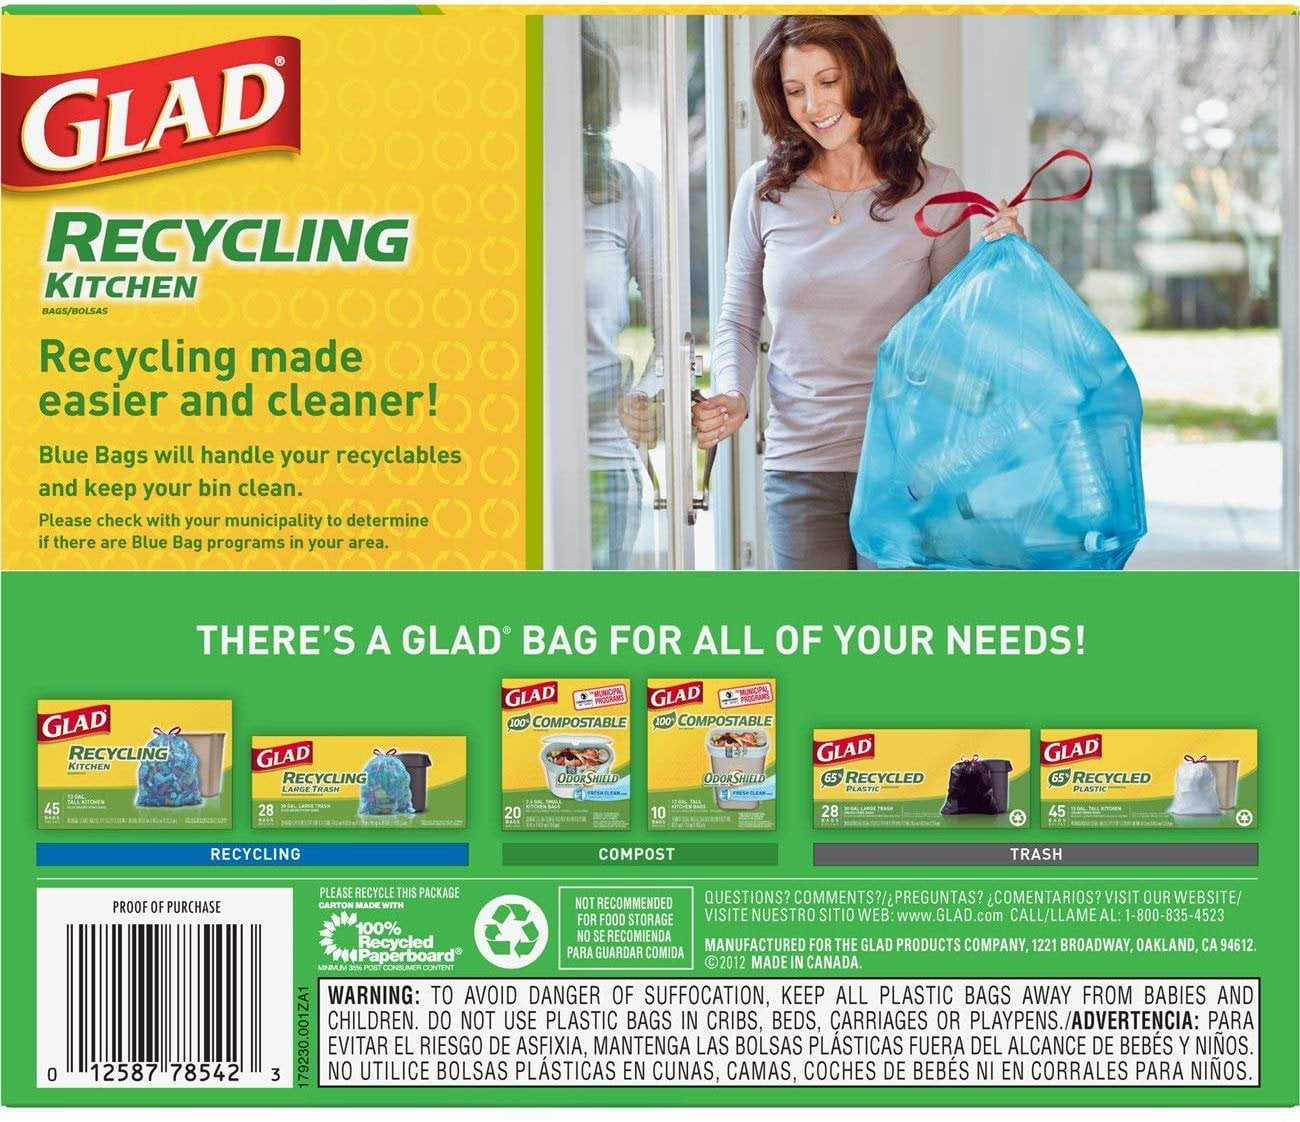 Glad Recycling 13 Gal. Tall Kitchen Blue Trash Bag (45-Count) - Power  Townsend Company